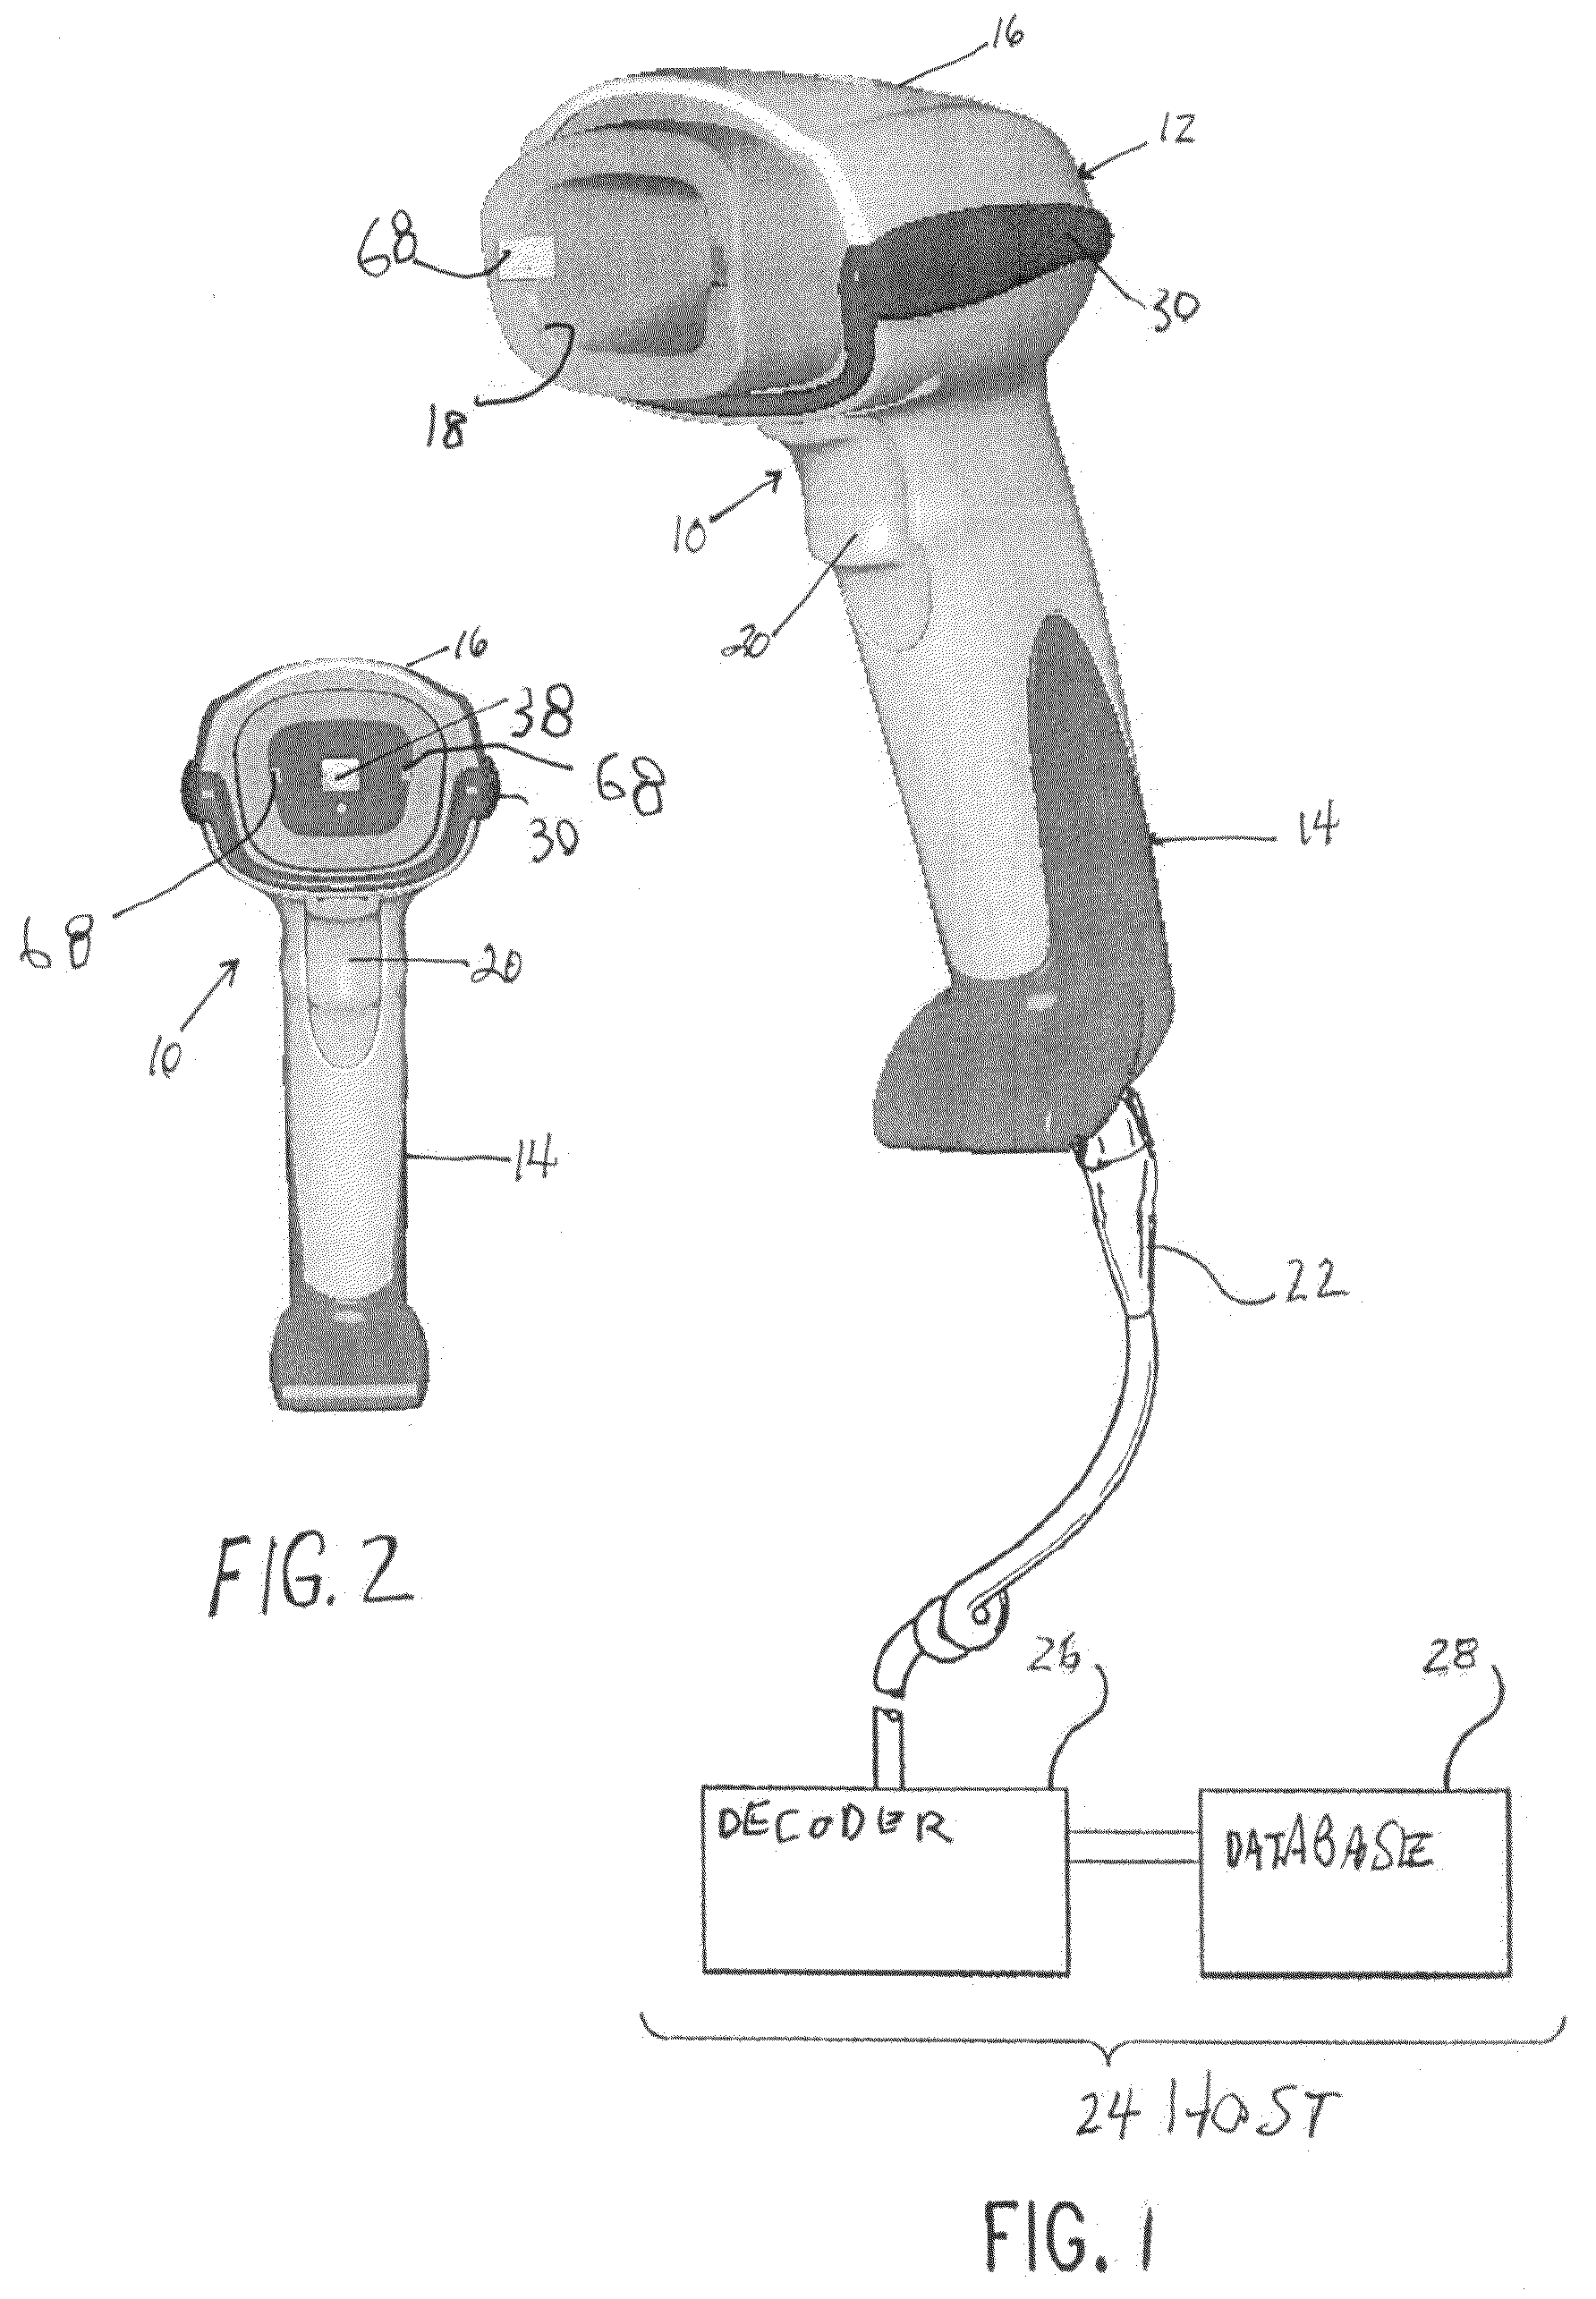 Arrangement for and method of uniformly illuminating direct part markings to be imaged and electro-optically read